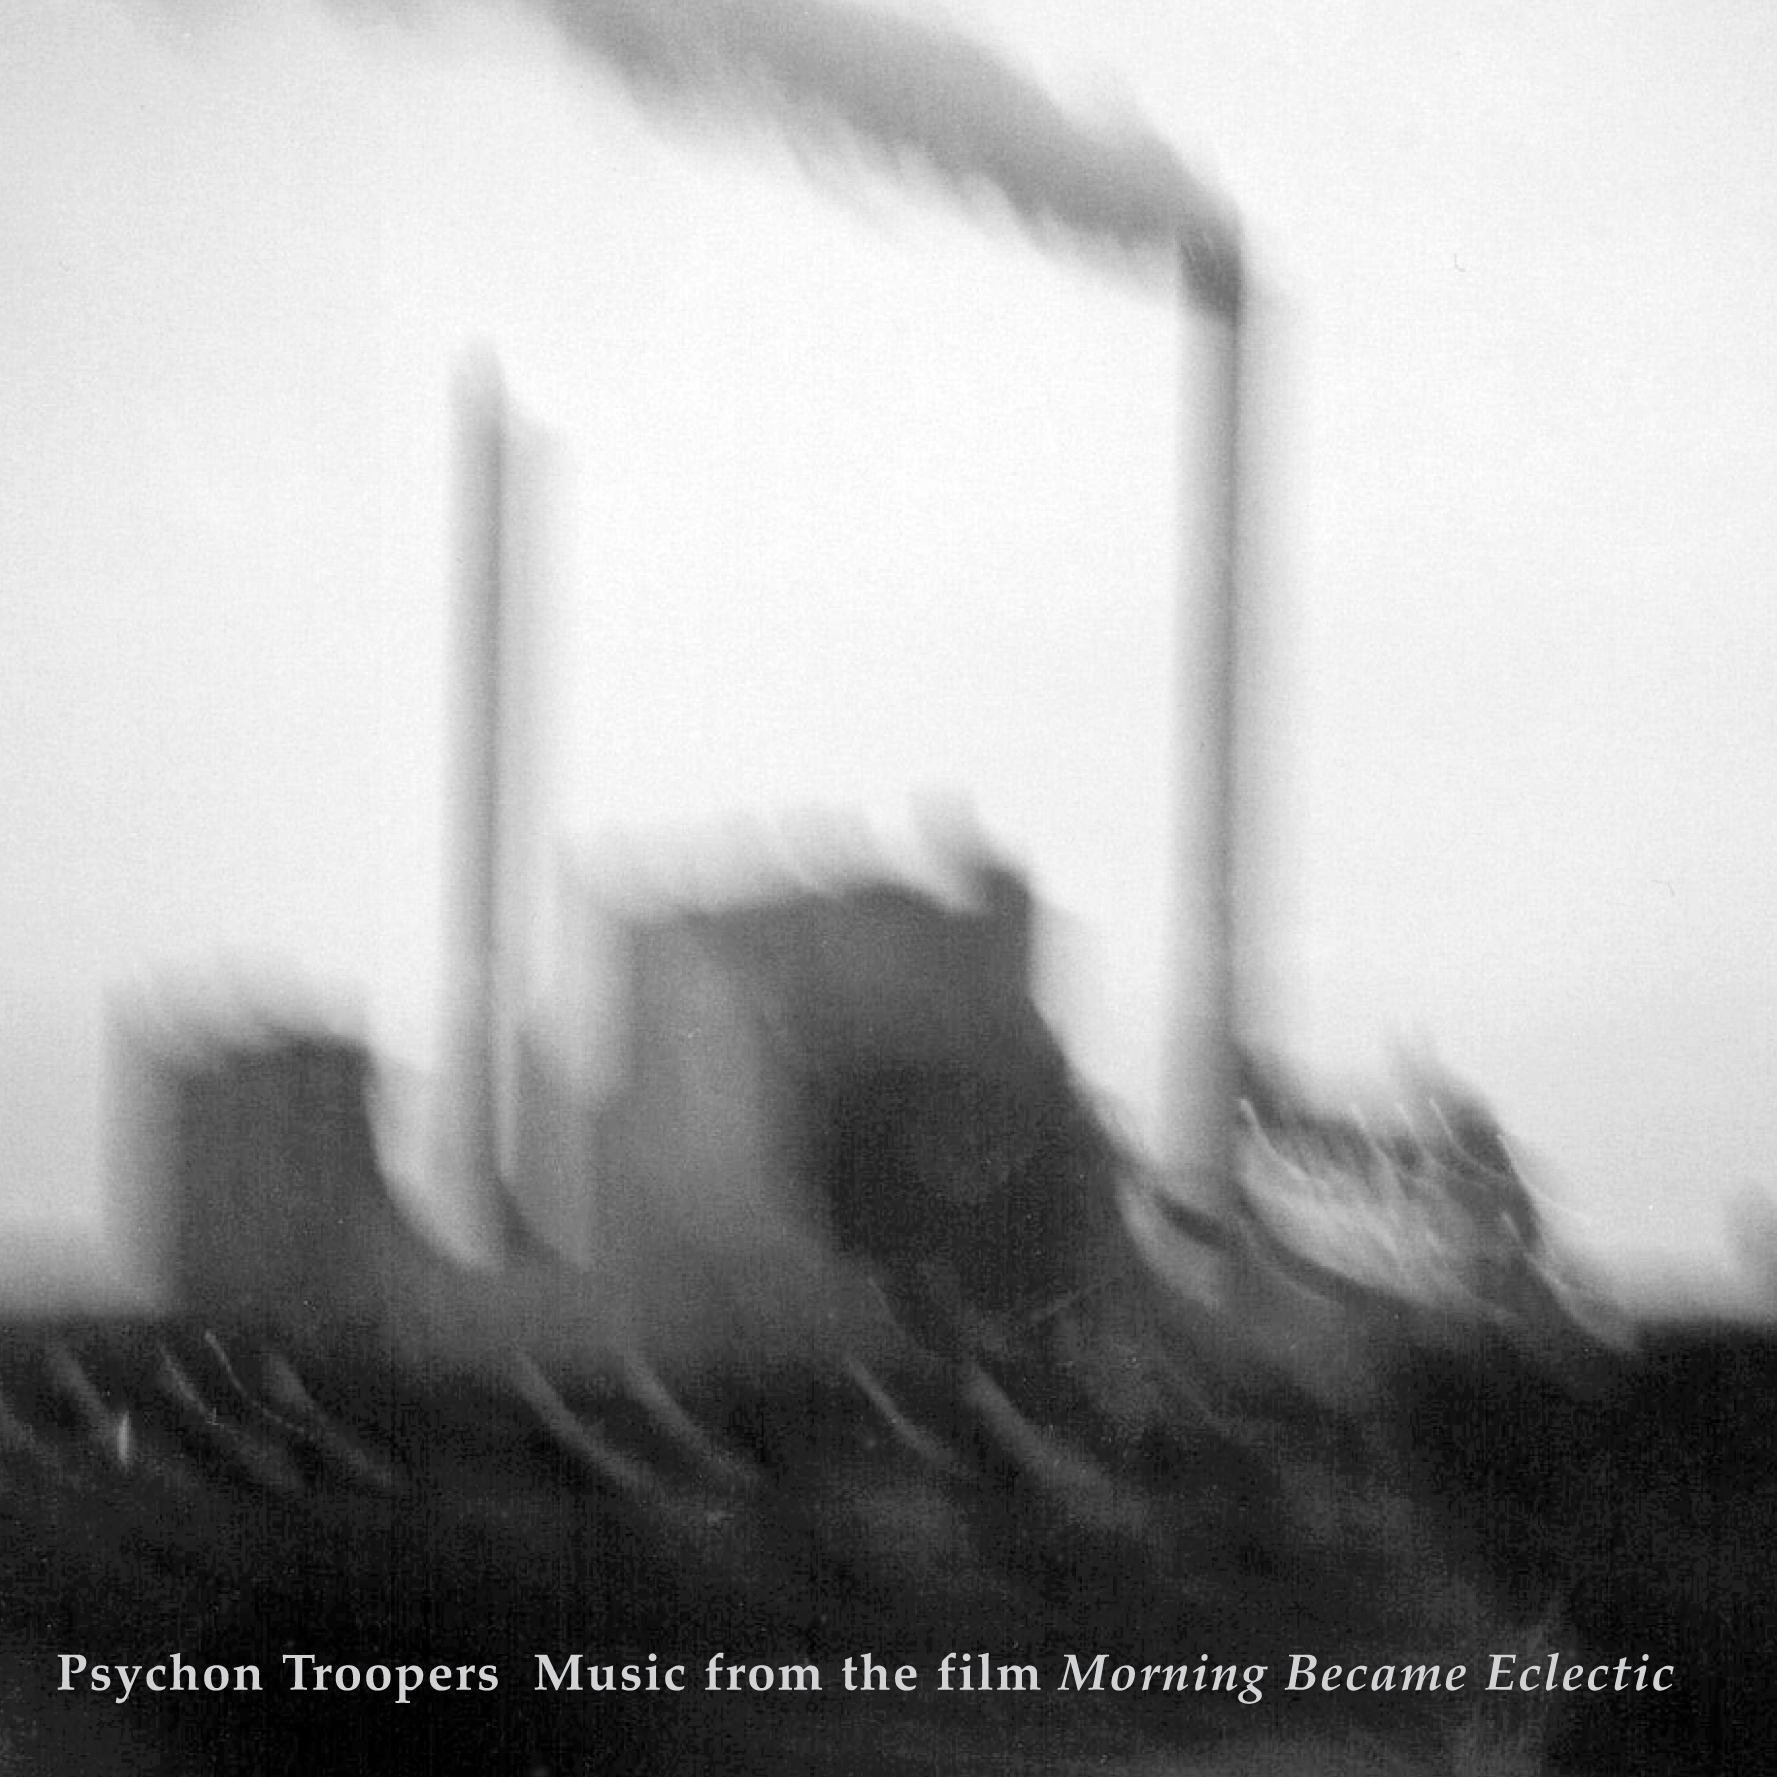 NM004: psychon troopers - music from the film morning became eclectic